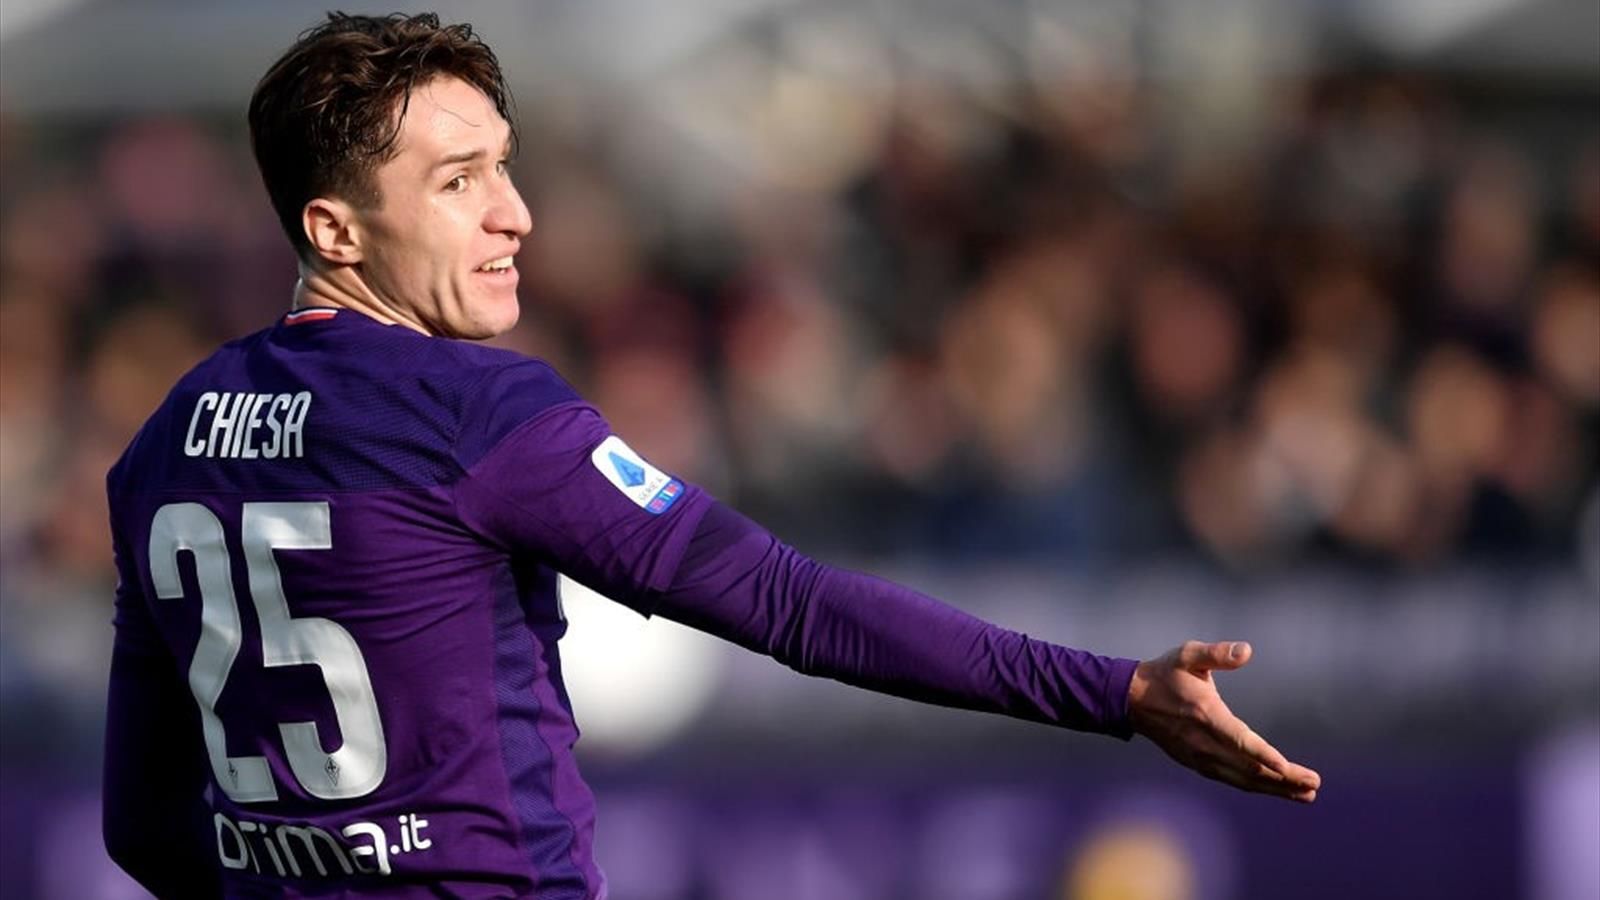 Manchester United Offers a Bid for Federico Chiesa